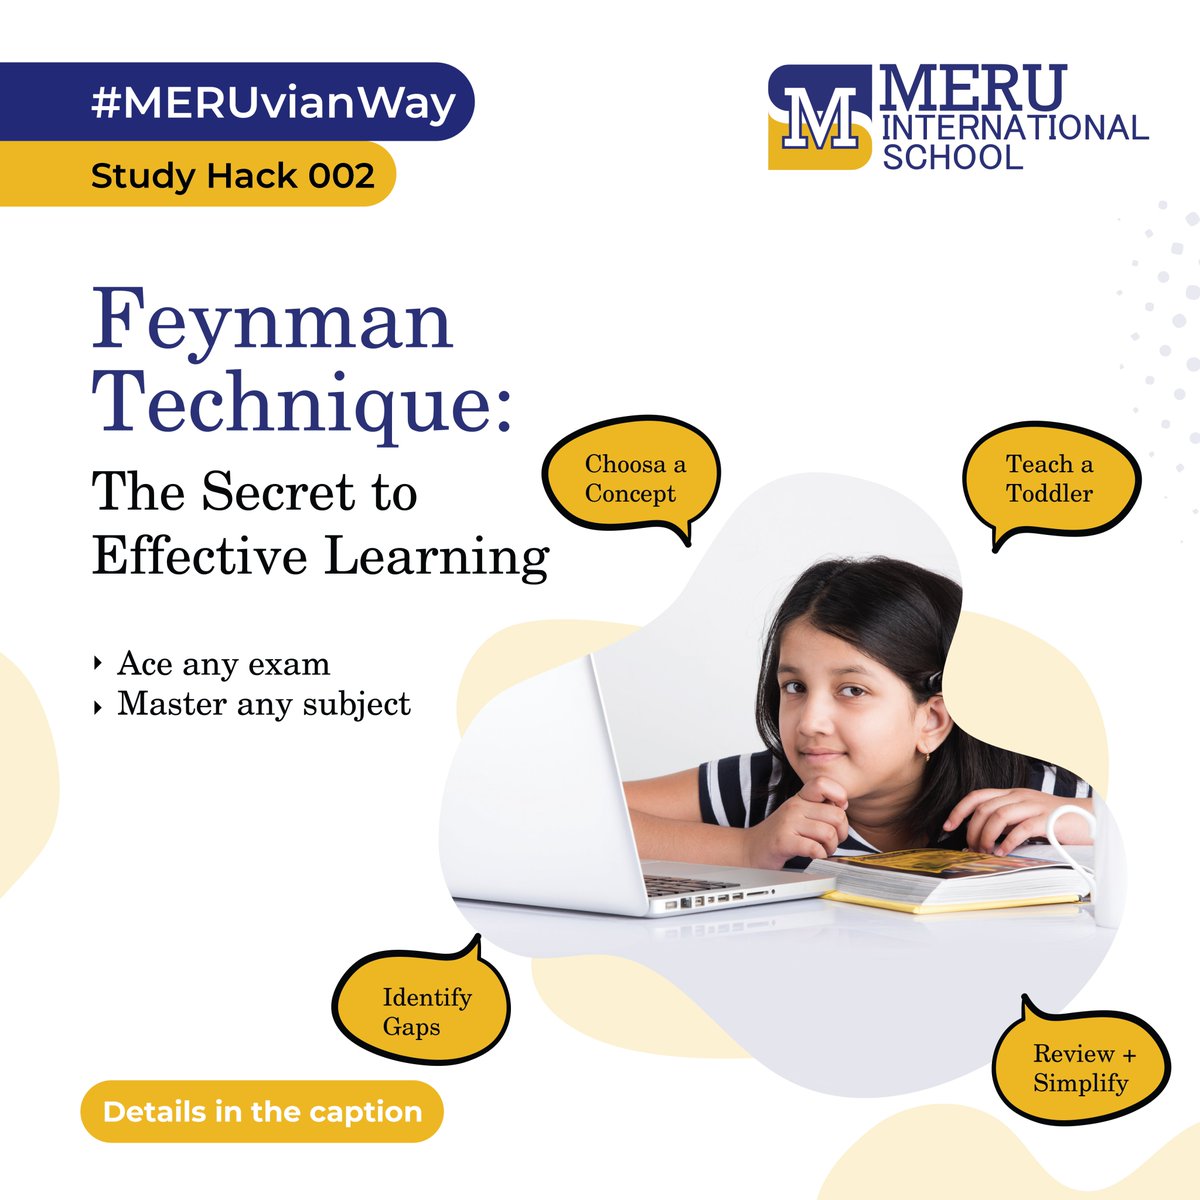 The Feynman Technique is a learning method that involves simplifying complex concepts and teaching them as if to a beginner. It helps identify gaps in knowledge and reinforces understanding. 

#FeynmanTechnique #StudyTips #TheMeruvianWay